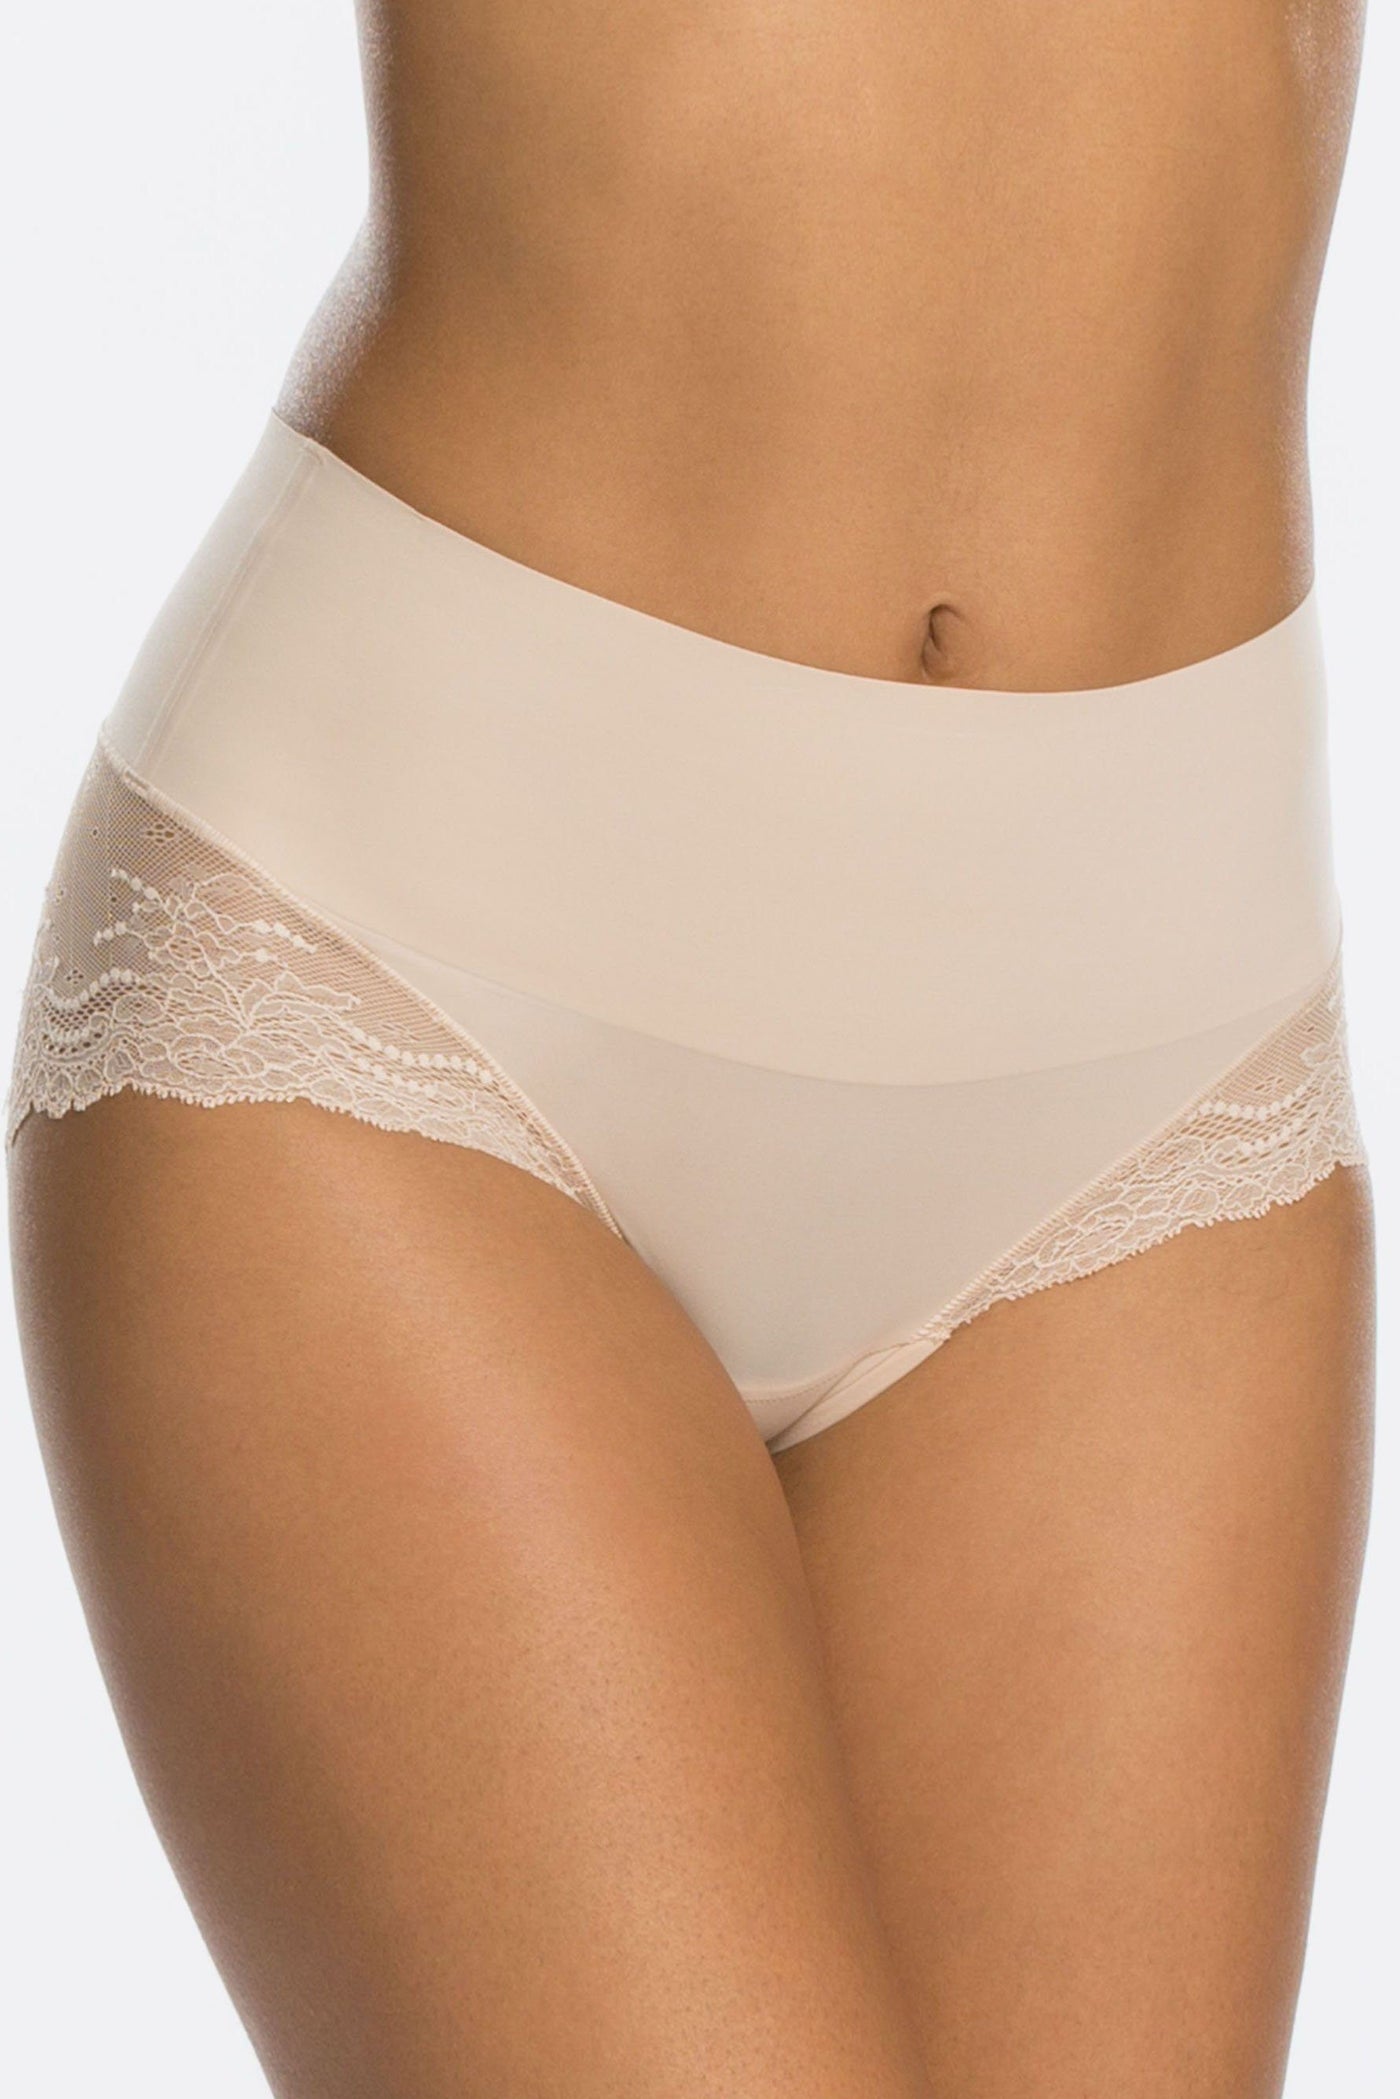 Braut Dessous, Undie-Tectable Lace Hi-Hipster - SPANXBraut Dessous, Undie-Tectable Lace Hi-Hipster - SPANX in Soft Nude, Beige